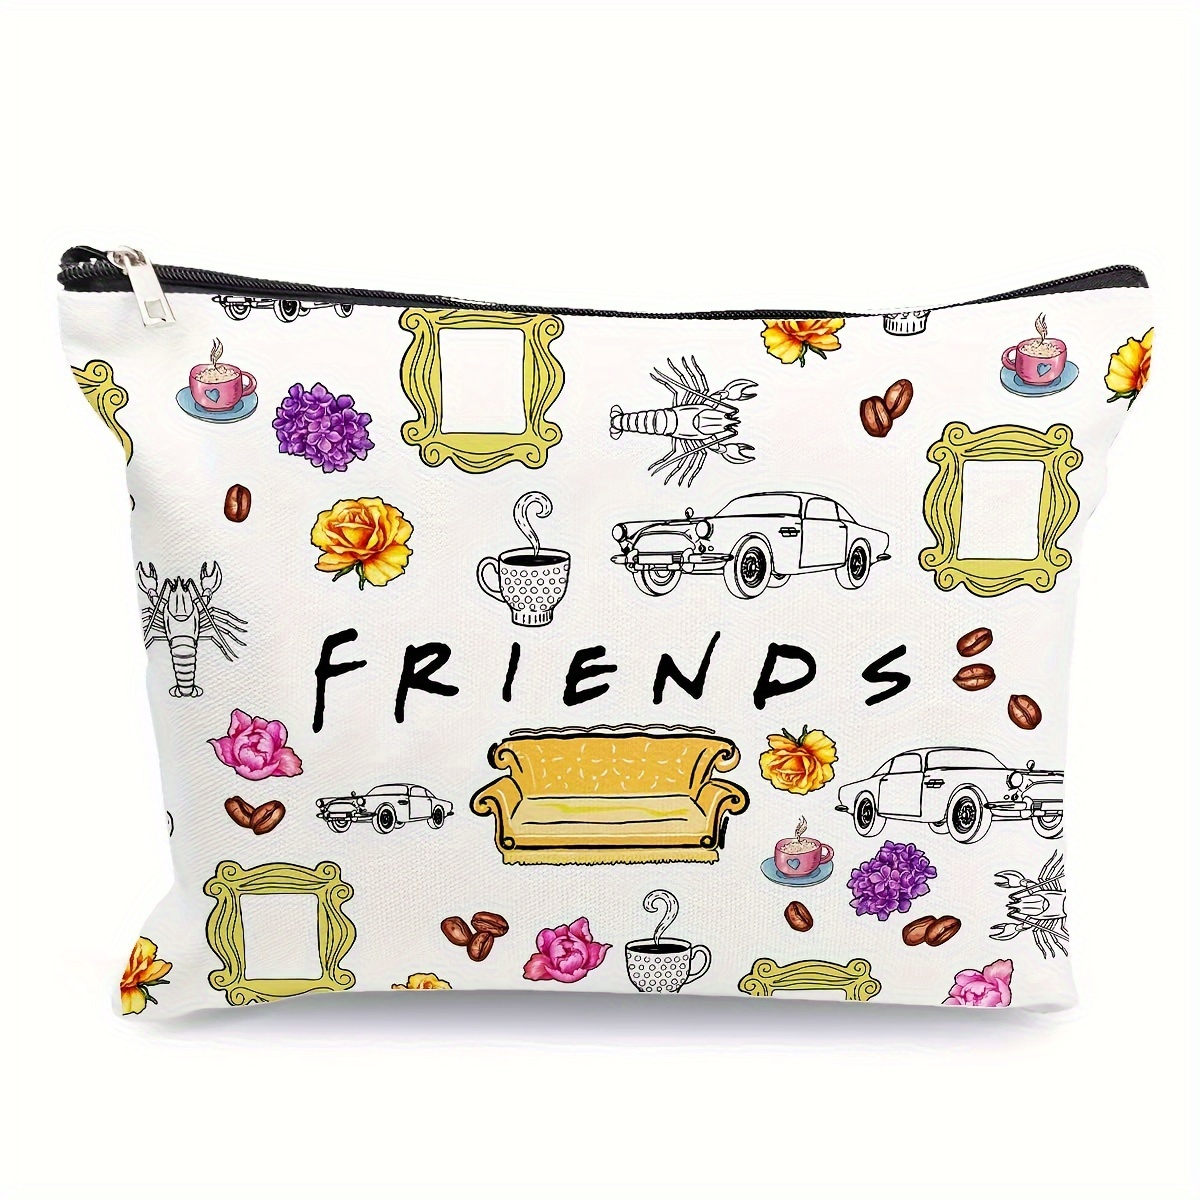 

Funny Makeup Cosmetic Bags Friends Merchandise Cotton Zipper Pouch Travel Bag Toiletry Make-up Case For Friends Fans Women Friend Bestie Birthday Gifts